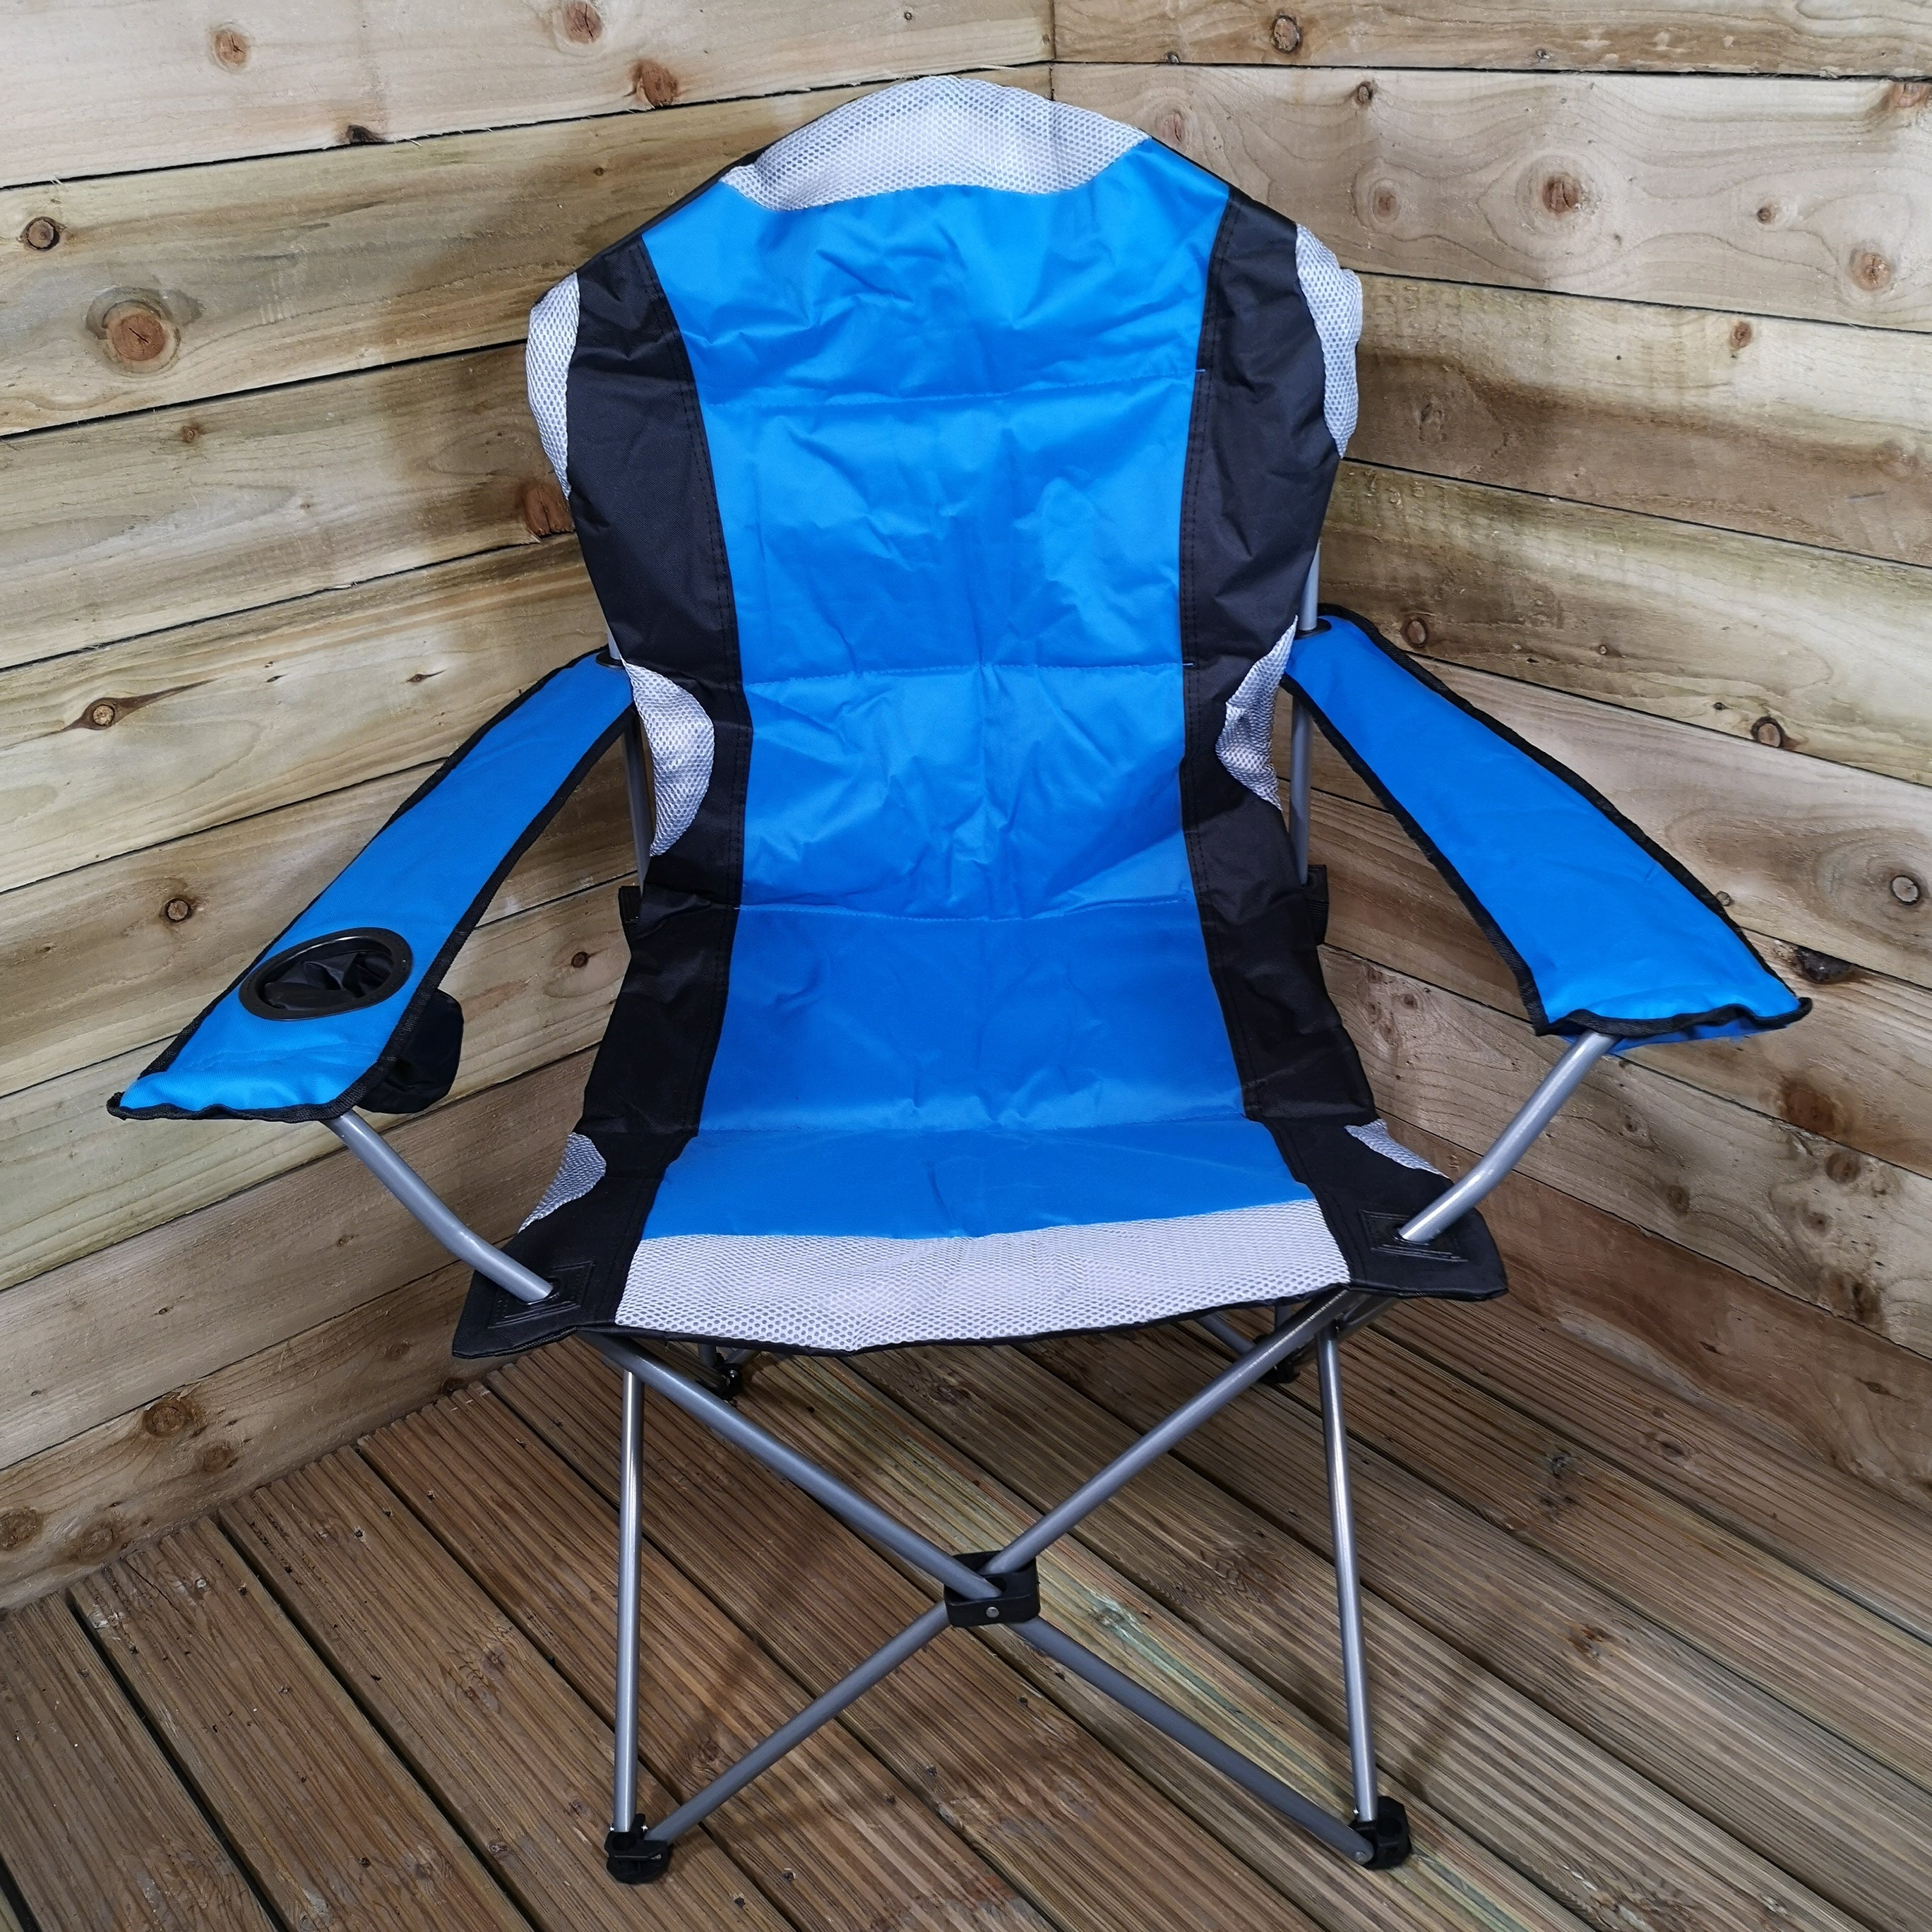 Samuel Alexander Luxury Padded High Back Folding Outdoor / Camping / Fishing Chair in Blue